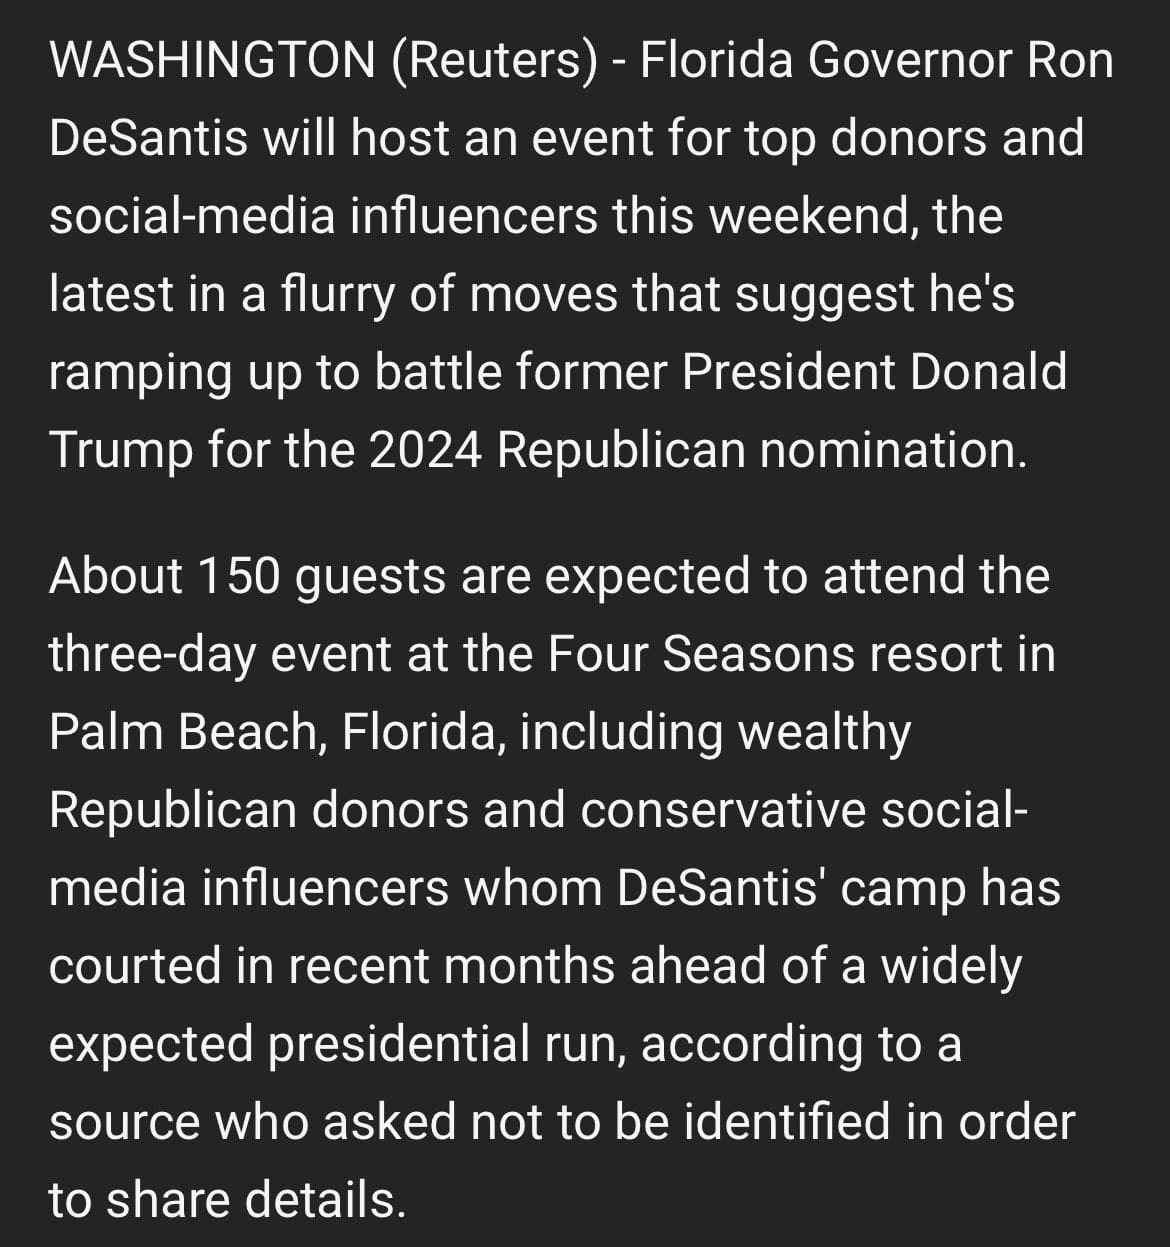 May be an image of text that says 'WASHINGTON (Reuters) Florida Governor Ron DeSantis will host an event for top donors and social-media influencers this weekend, the latest in a flurry of moves that suggest he's ramping up to battle former President Donald Trump for the 2024 Republican nomination. About 150 guests are expected to attend the three-day event at the Four Seasons resort in Palm Beach, Florida, including wealthy Republican donors and conservative social- media influencers whom DeSantis' camp has courted in recent months ahead of a widely expected presidential run, according to a source who asked not to be identified in order to share details.'